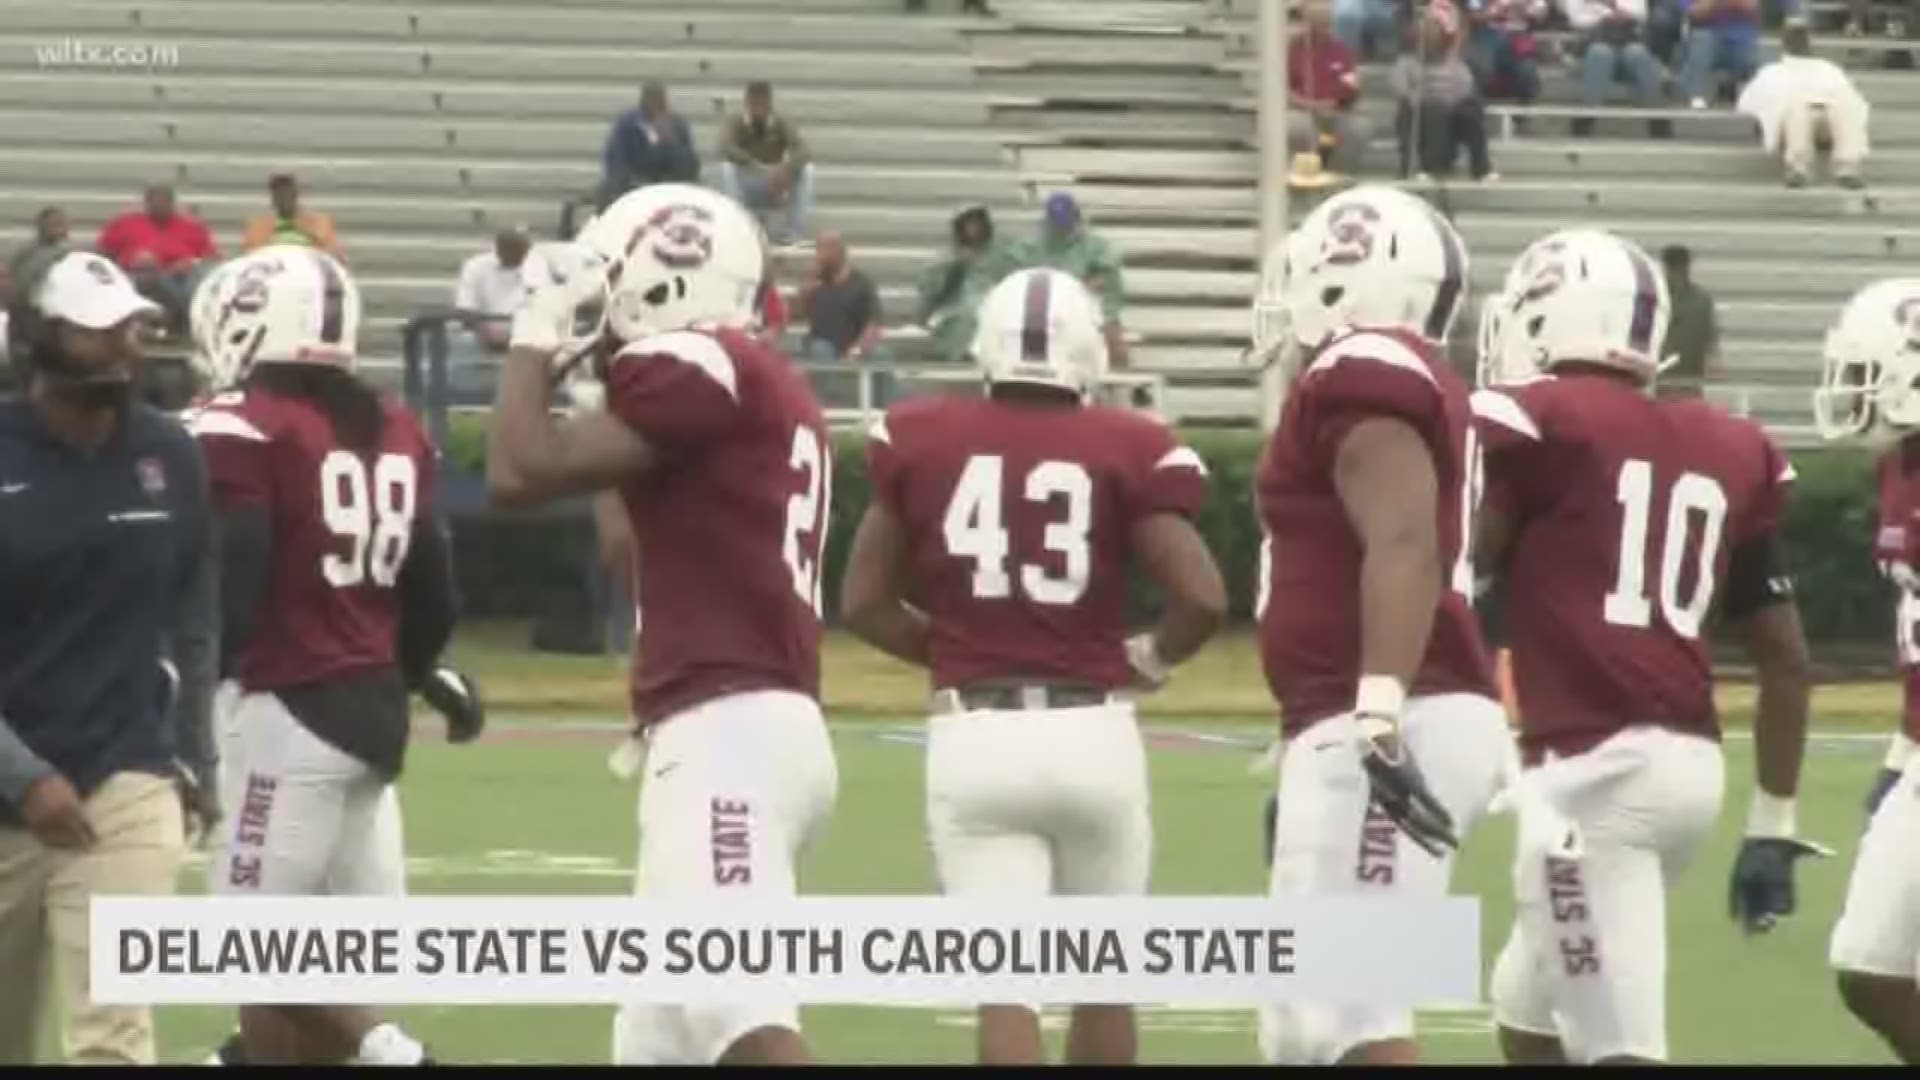 SC State's defense sets the tone in the first and their offense takes over in the second half as the Bulldogs win 30-19 over Delaware State.